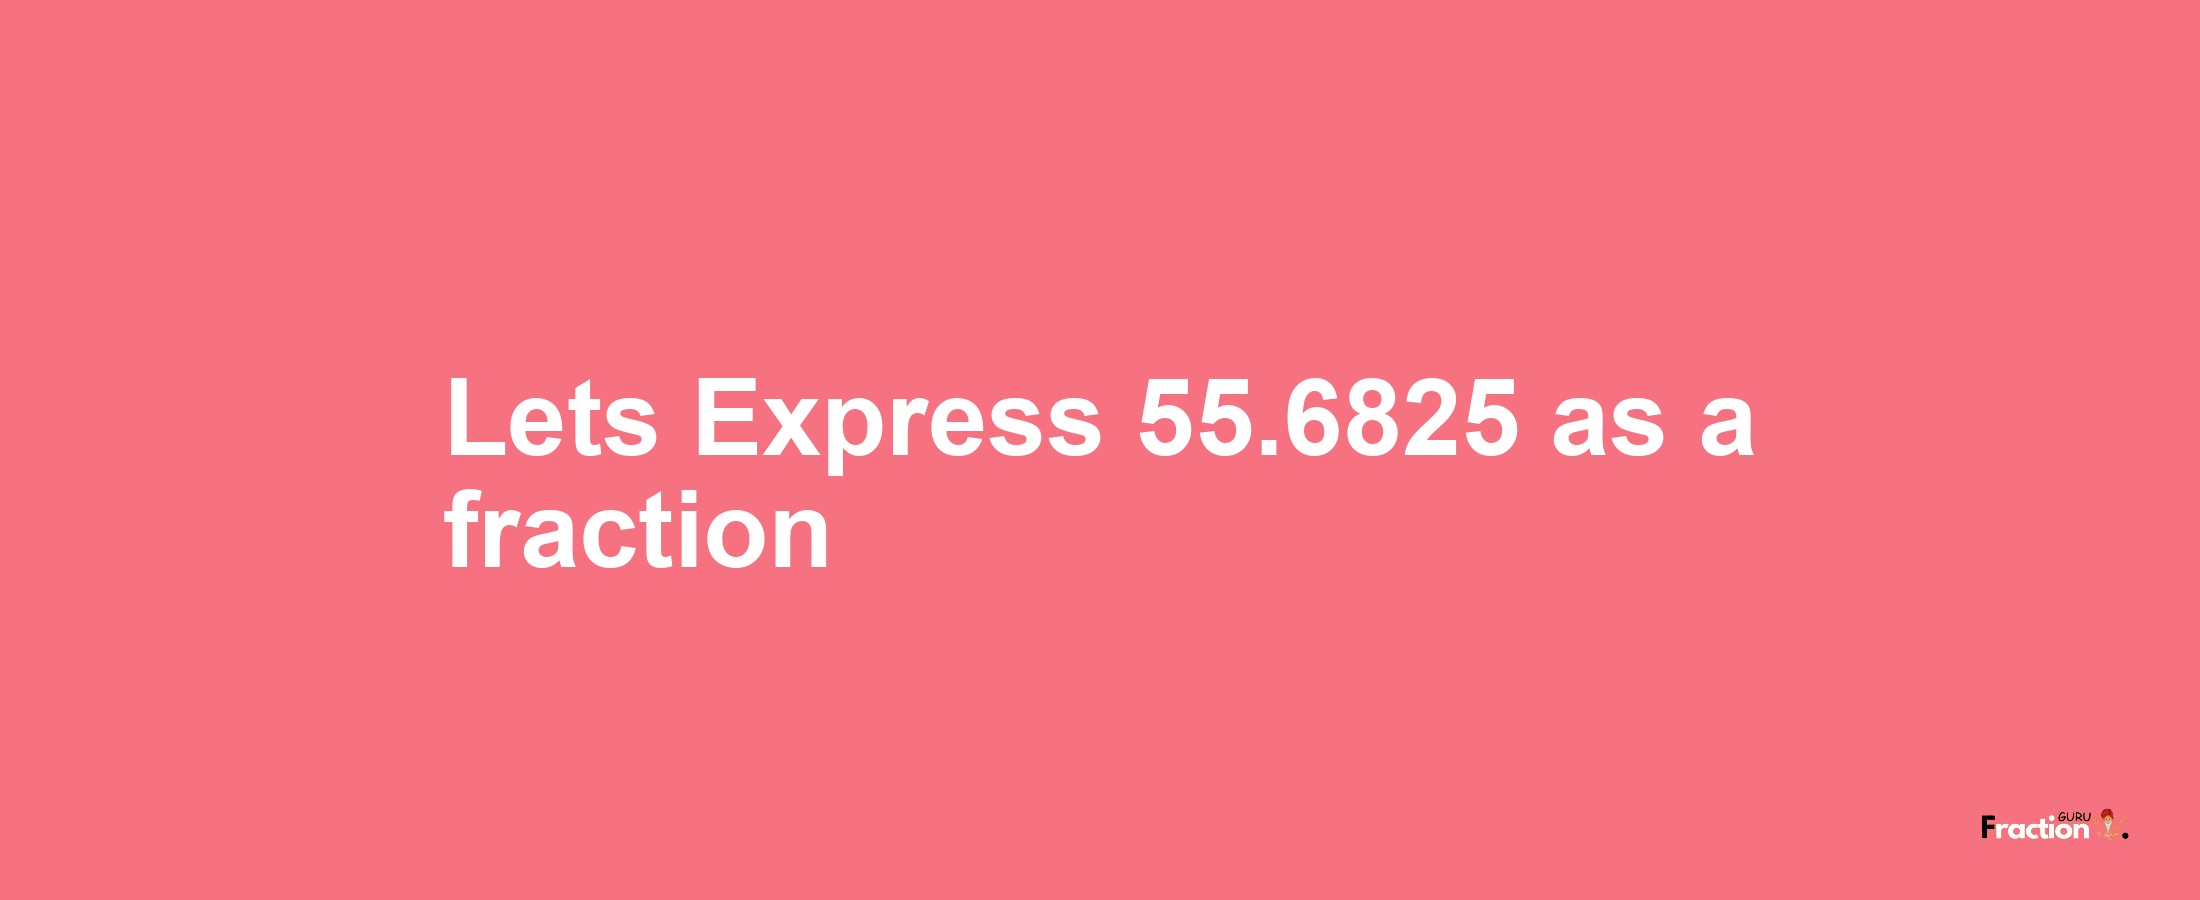 Lets Express 55.6825 as afraction